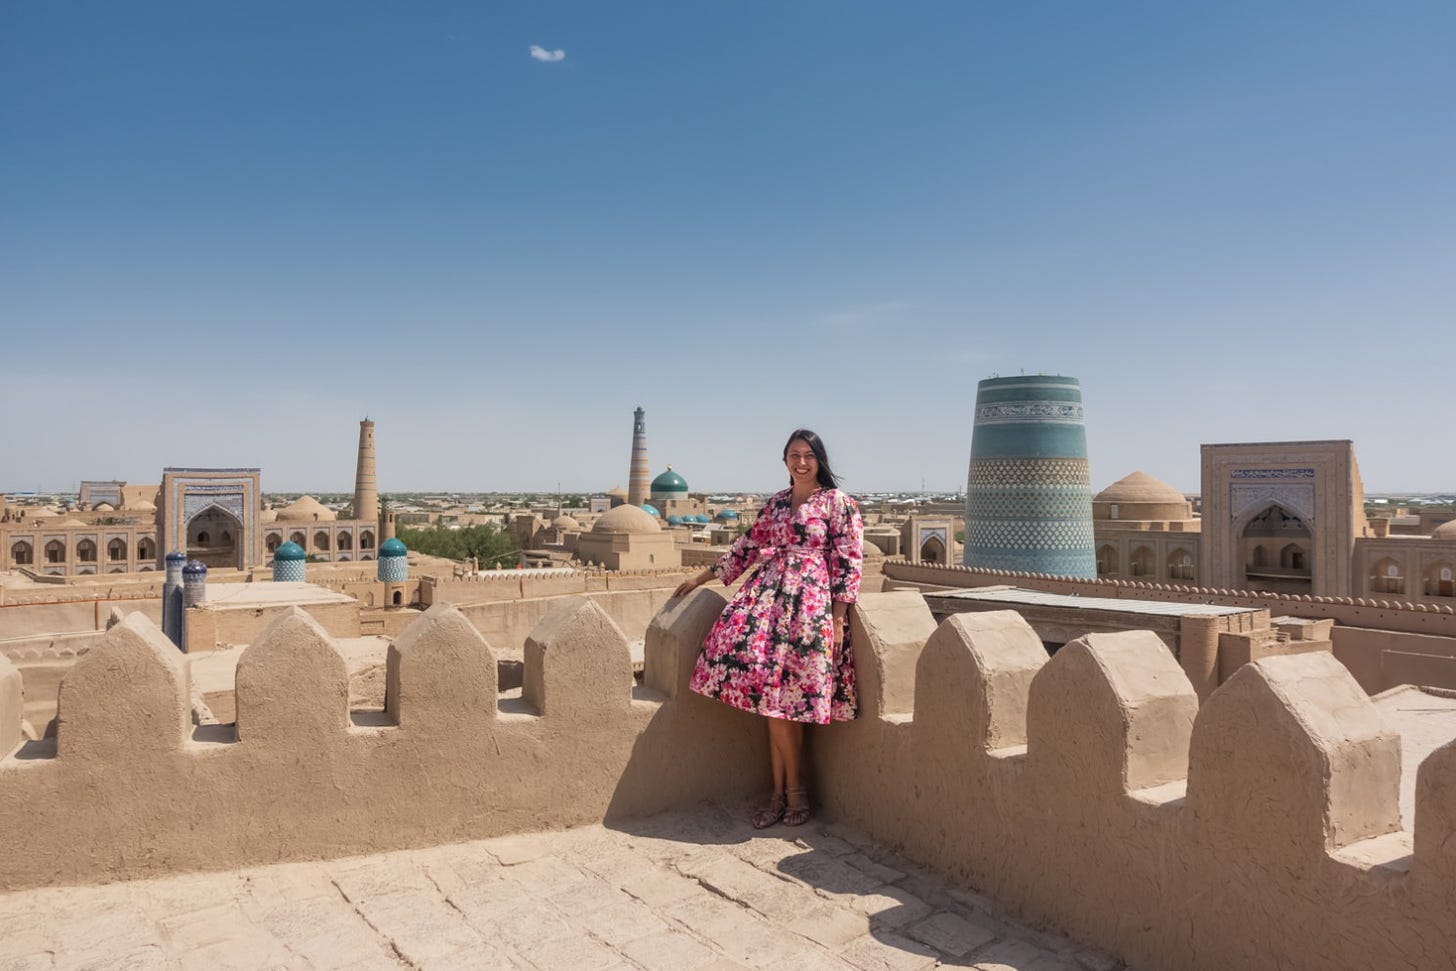 Visiting the Silk Road in Khiva, Uzbekistan, two days before an almost deadly car accident in the same country.